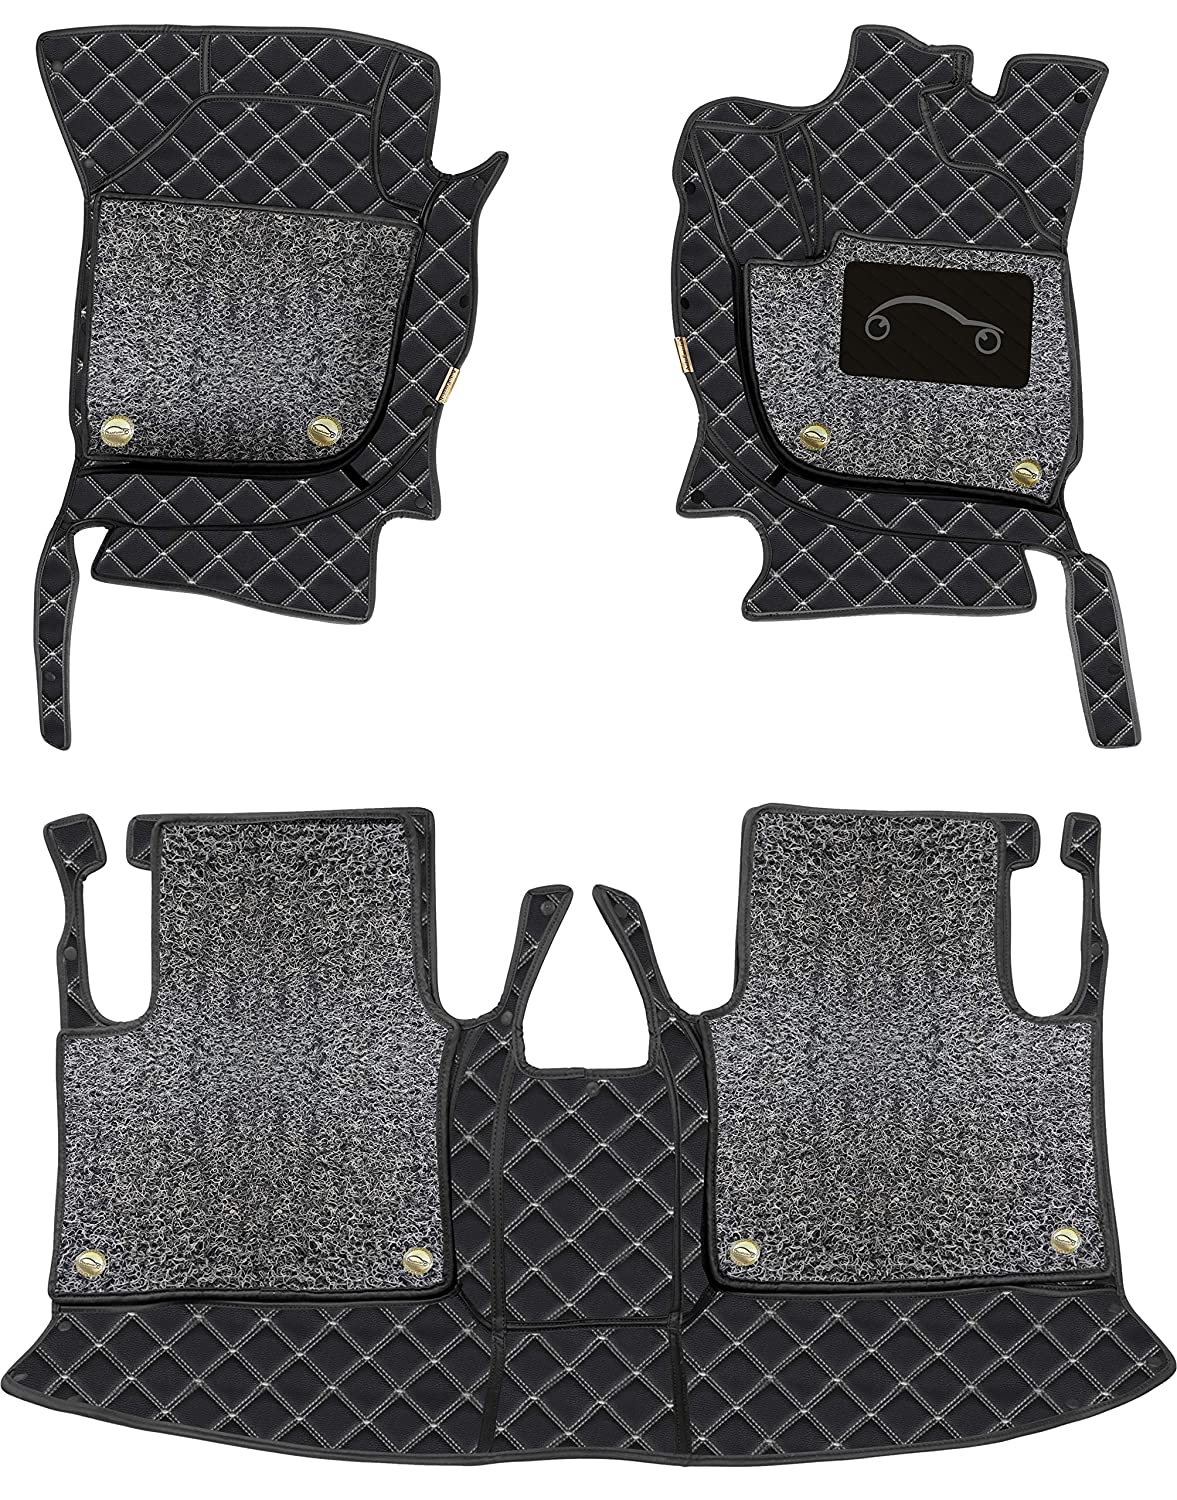 Volkswagen Tiguan 2019 7D Luxury Car Mat, All Weather Proof, Anti-Skid, 100% Waterproof & Odorless with Unique Diamond Fish Design (24mm Luxury PU Leather, 2 Rows)